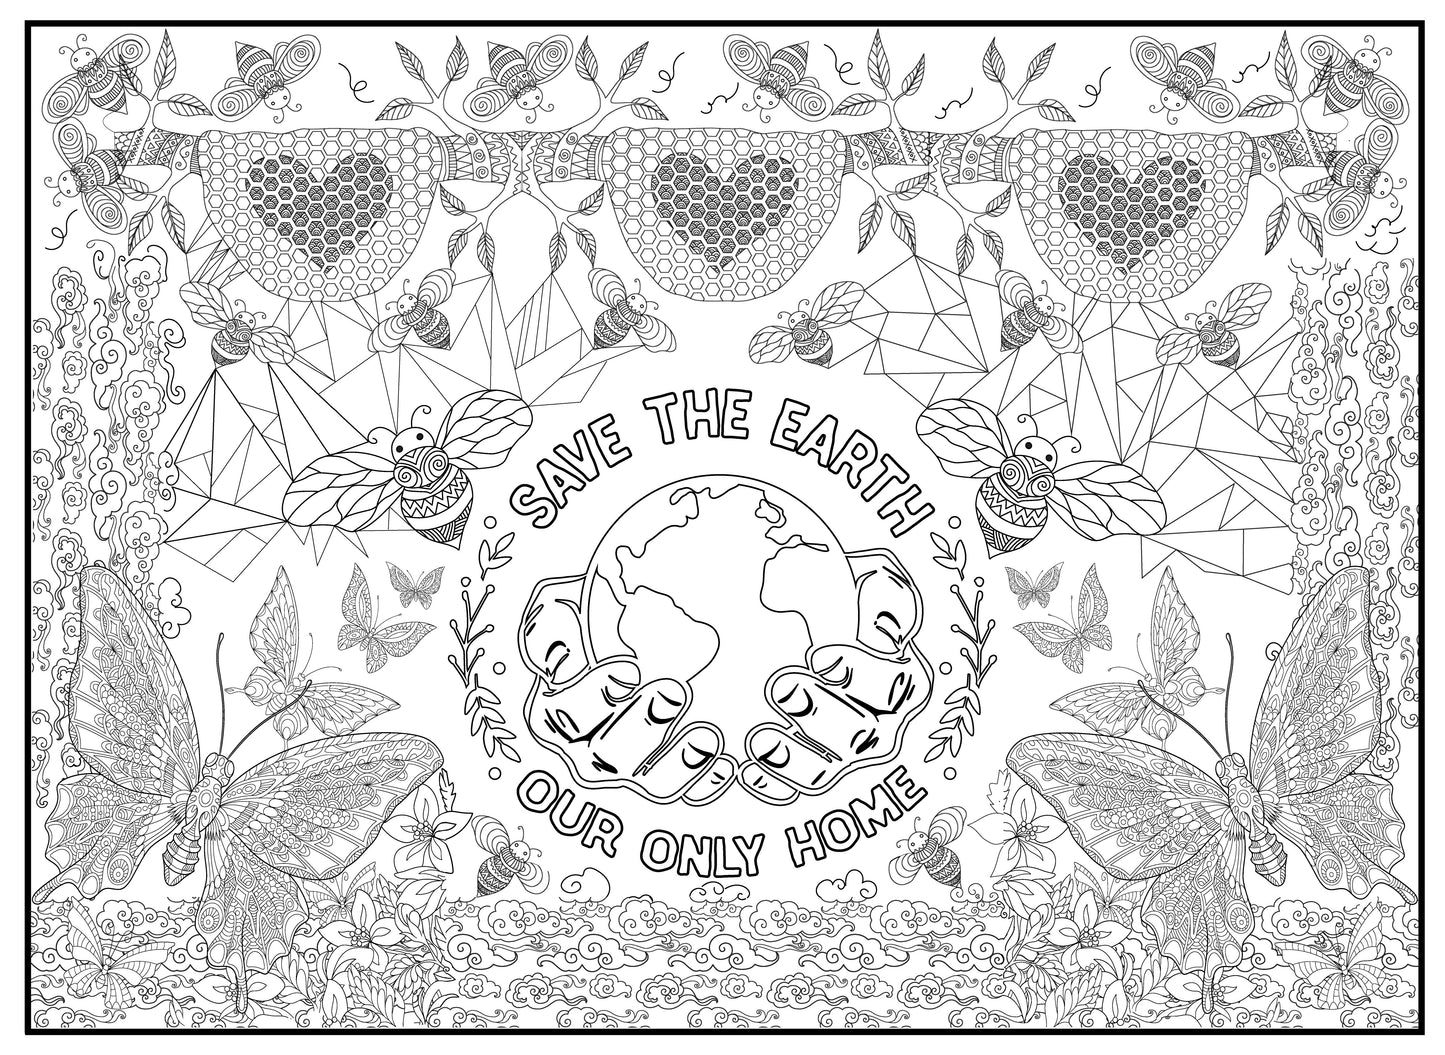 Save the Earth Personalized Giant Coloring Poster 46" x 60"